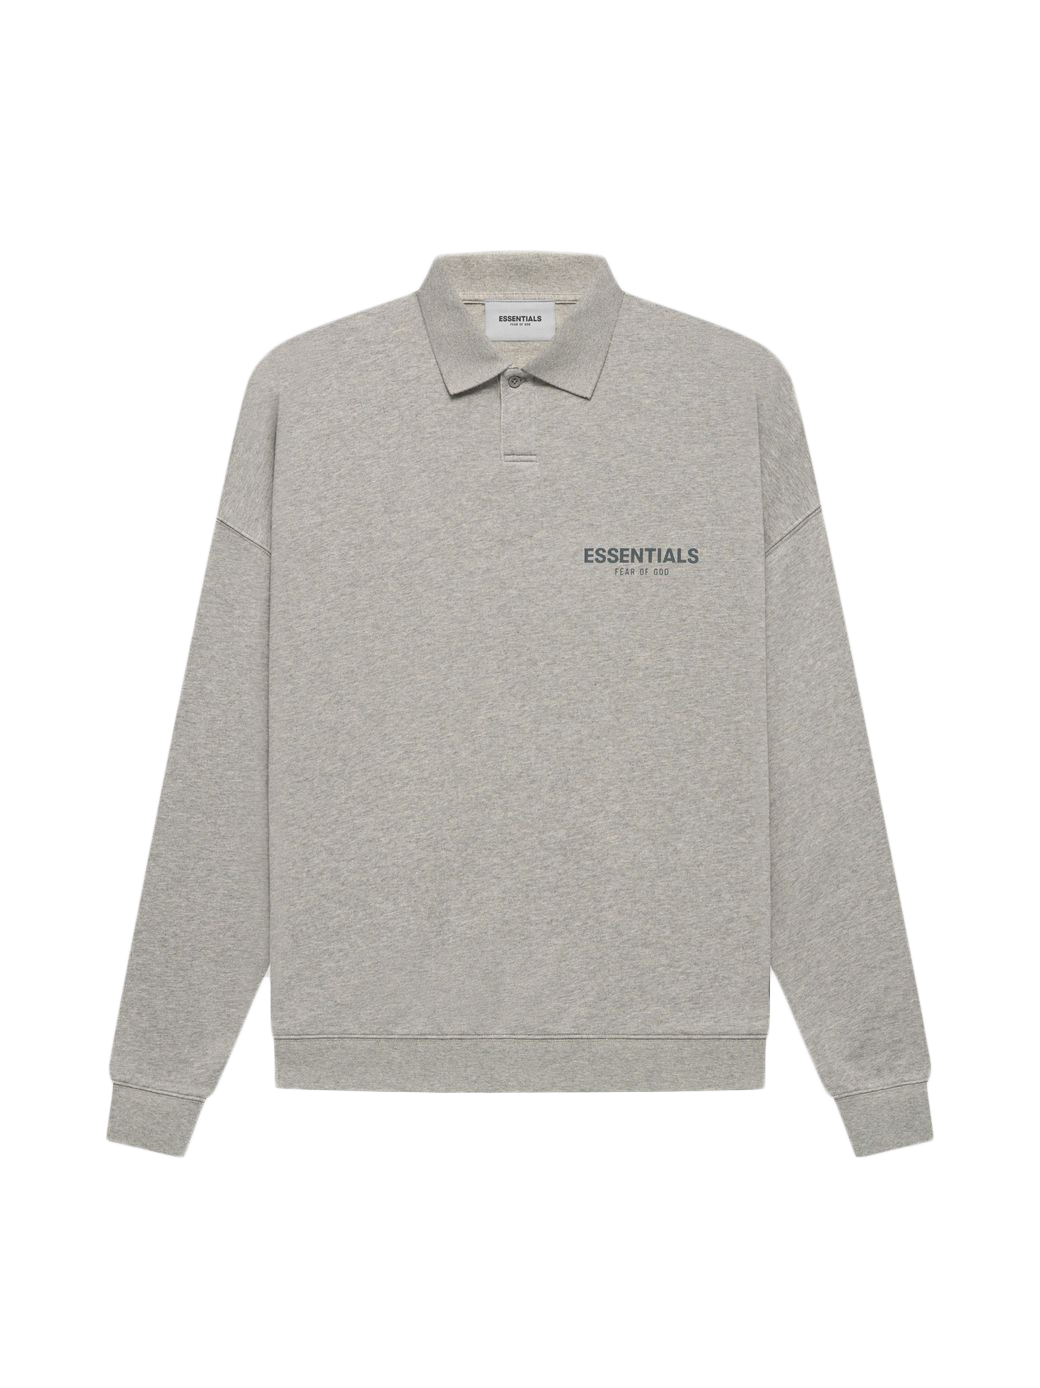 Fear of God Essentials Core Collection L/S Polo Dark Heather Oatmeal